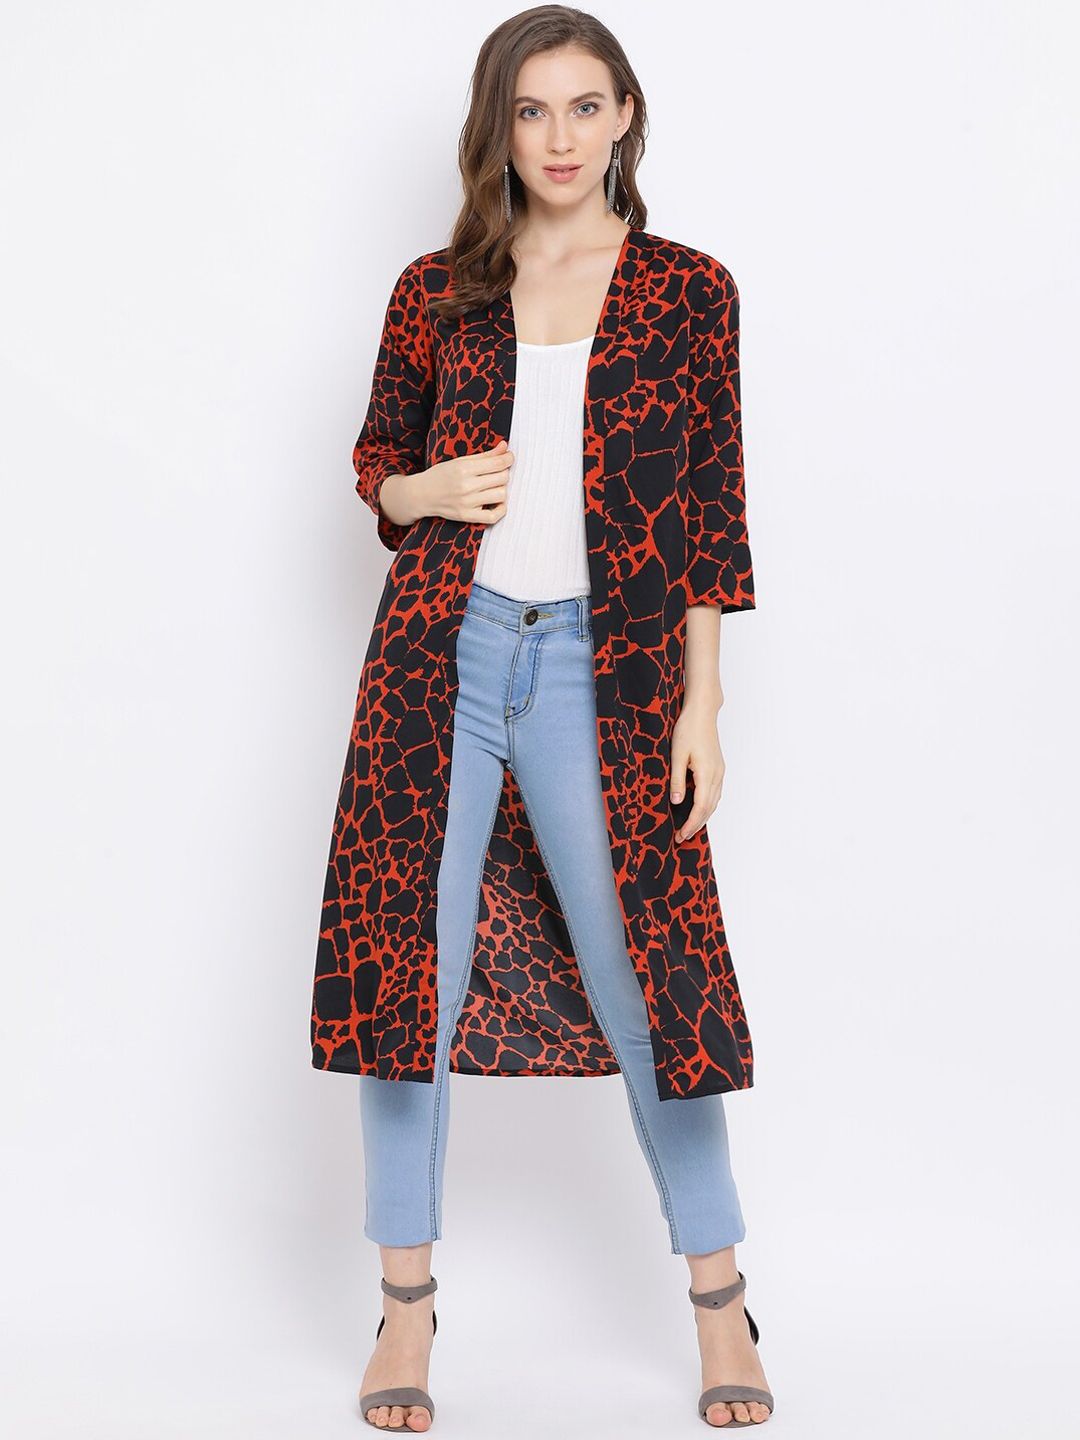 Oxolloxo Women Red & Black Printed Open Front Shrug Price in India